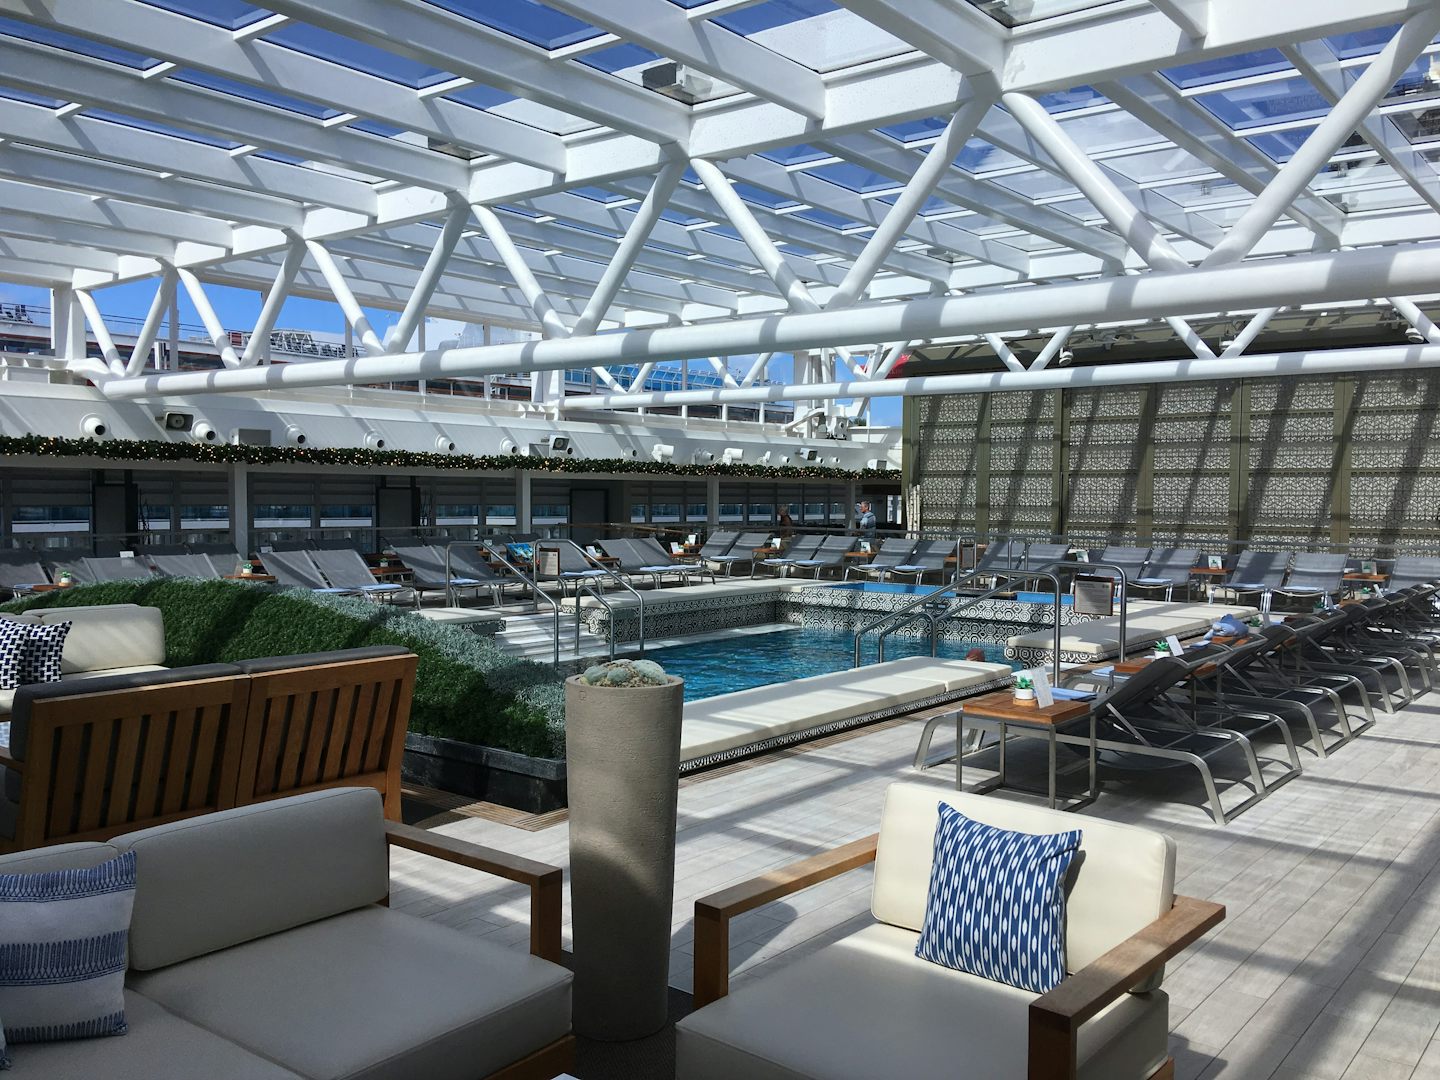 Main pool with roof closed.